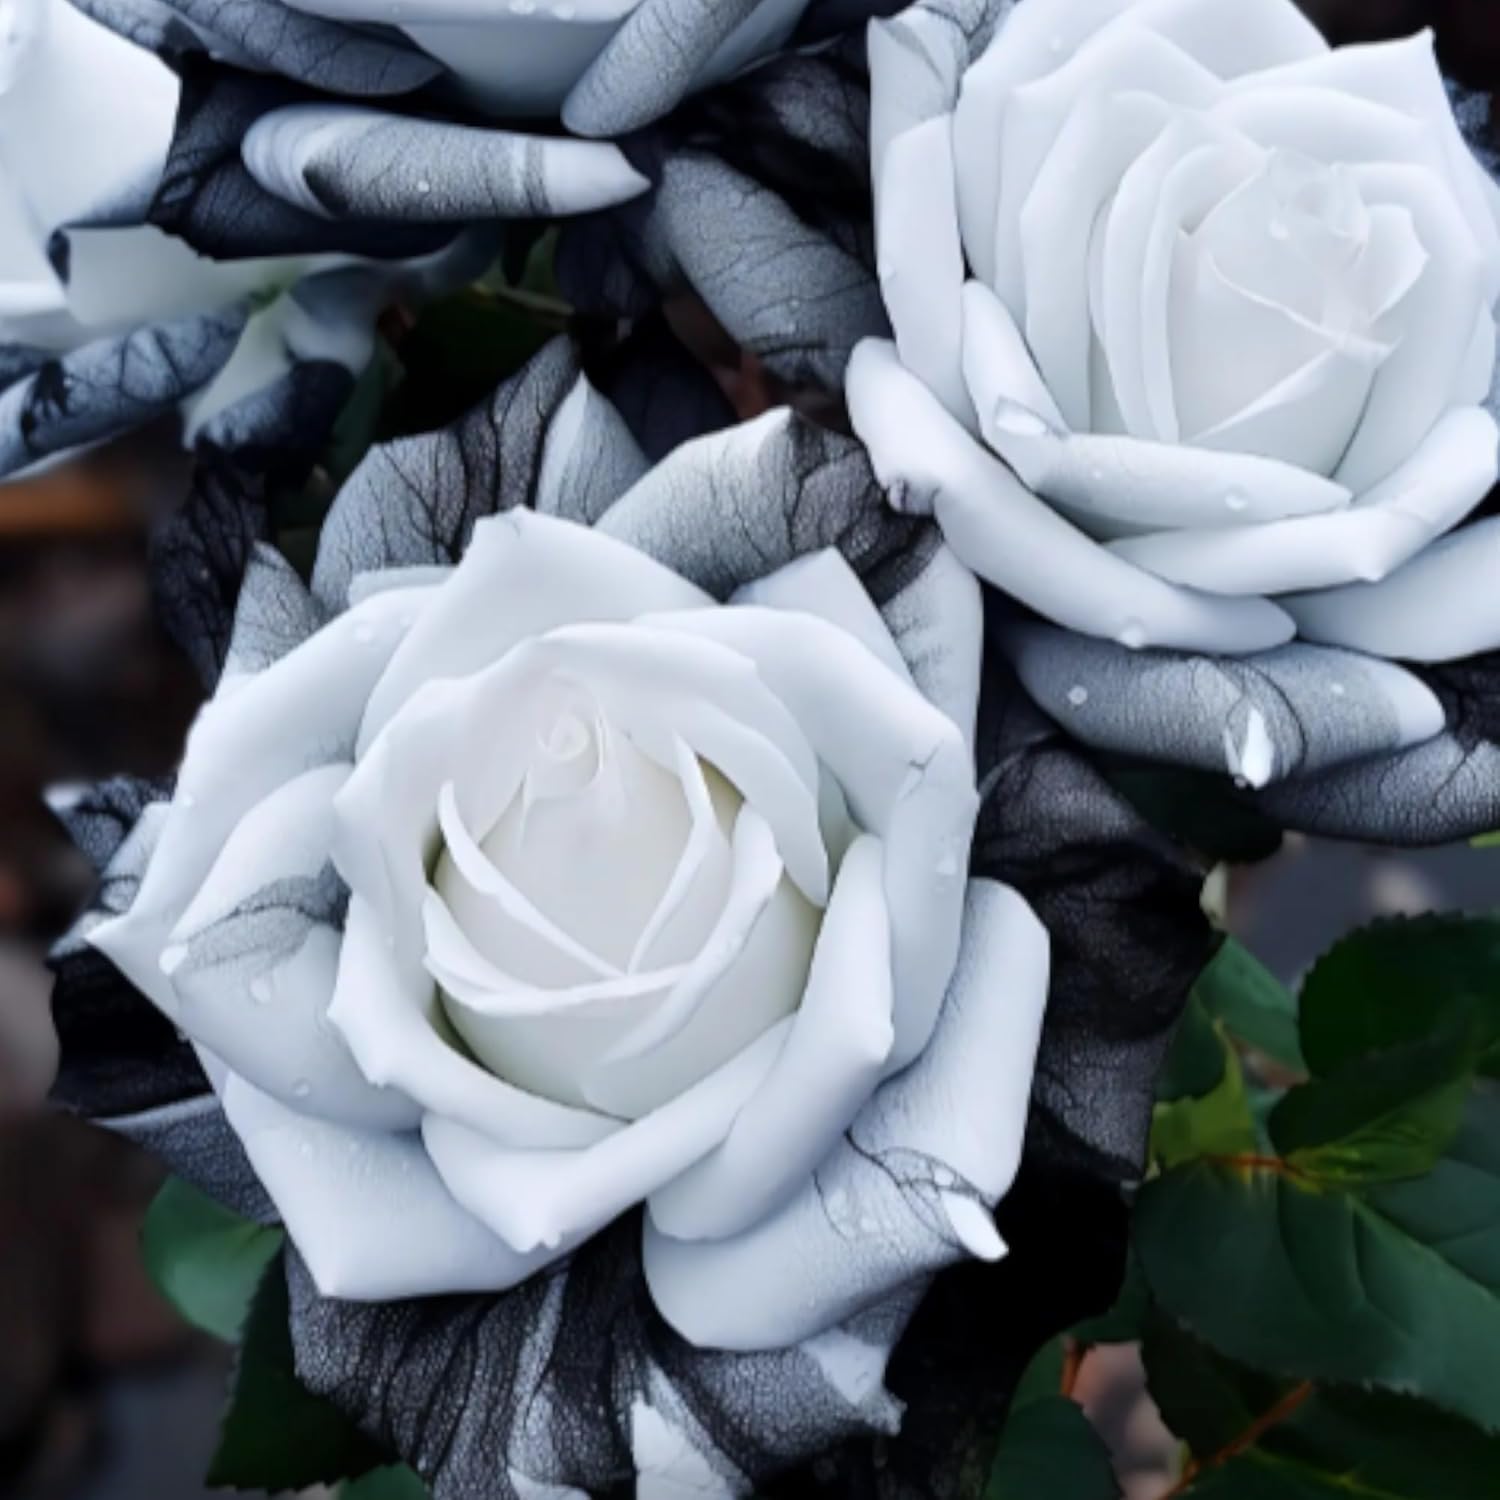 

Rare Ink Rose Seeds - Non-gmo Heirloom Variety - Captivating Beauty For Your Garden - Planting Instructions Included, White, Black